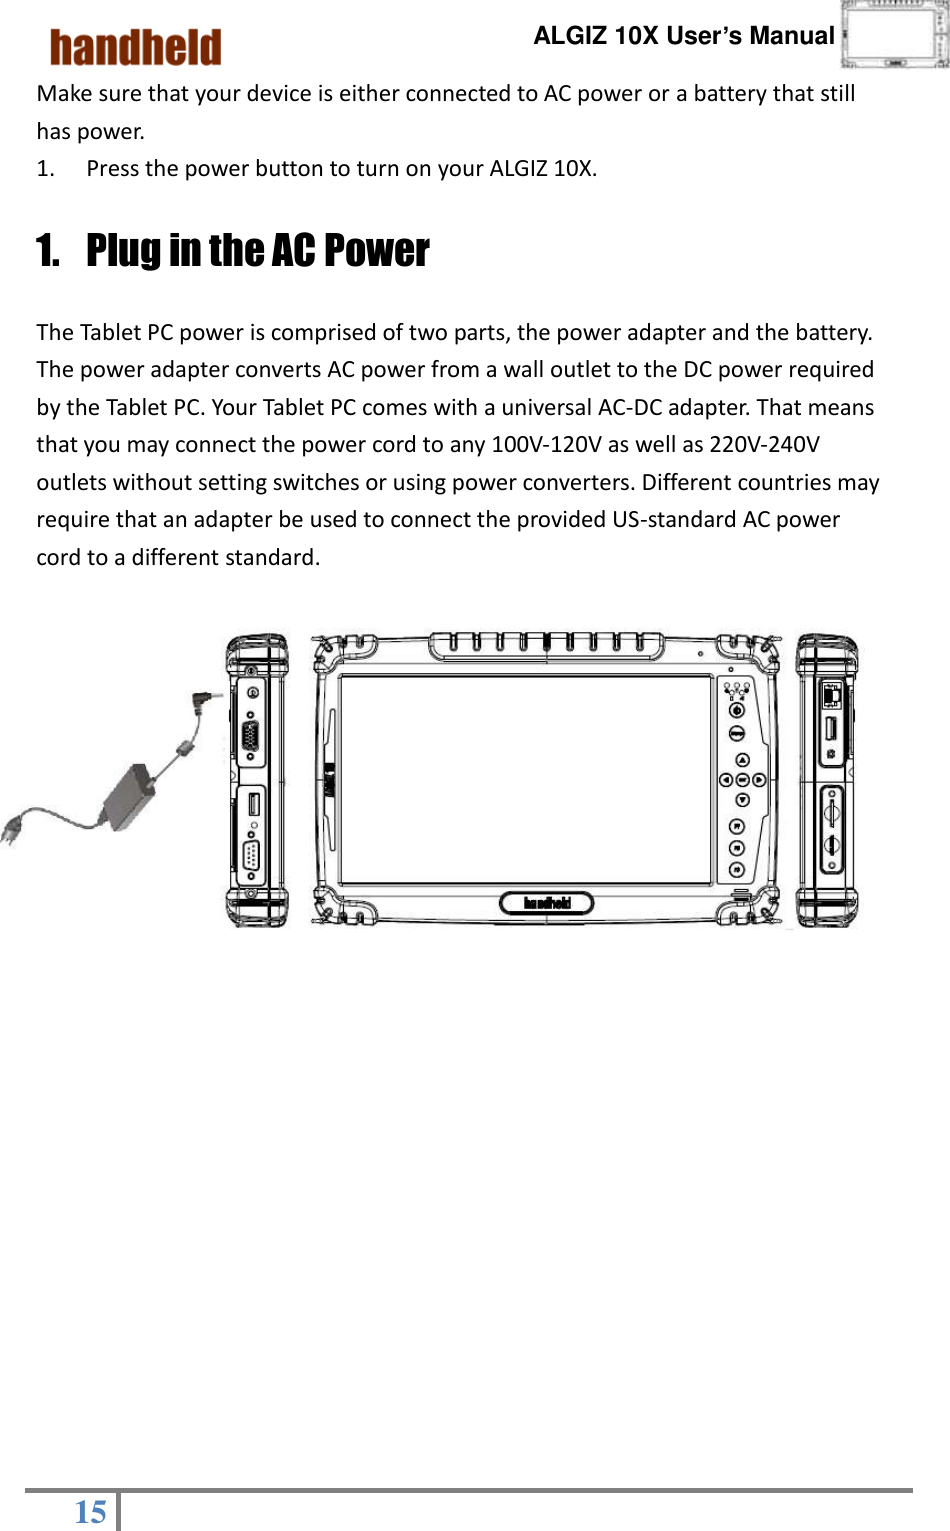      ALGIZ 10X User’s Manual  15   Make sure that your device is either connected to AC power or a battery that still has power. 1. Press the power button to turn on your ALGIZ 10X. 1. Plug in the AC Power The Tablet PC power is comprised of two parts, the power adapter and the battery. The power adapter converts AC power from a wall outlet to the DC power required by the Tablet PC. Your Tablet PC comes with a universal AC-DC adapter. That means that you may connect the power cord to any 100V-120V as well as 220V-240V outlets without setting switches or using power converters. Different countries may require that an adapter be used to connect the provided US-standard AC power cord to a different standard.            